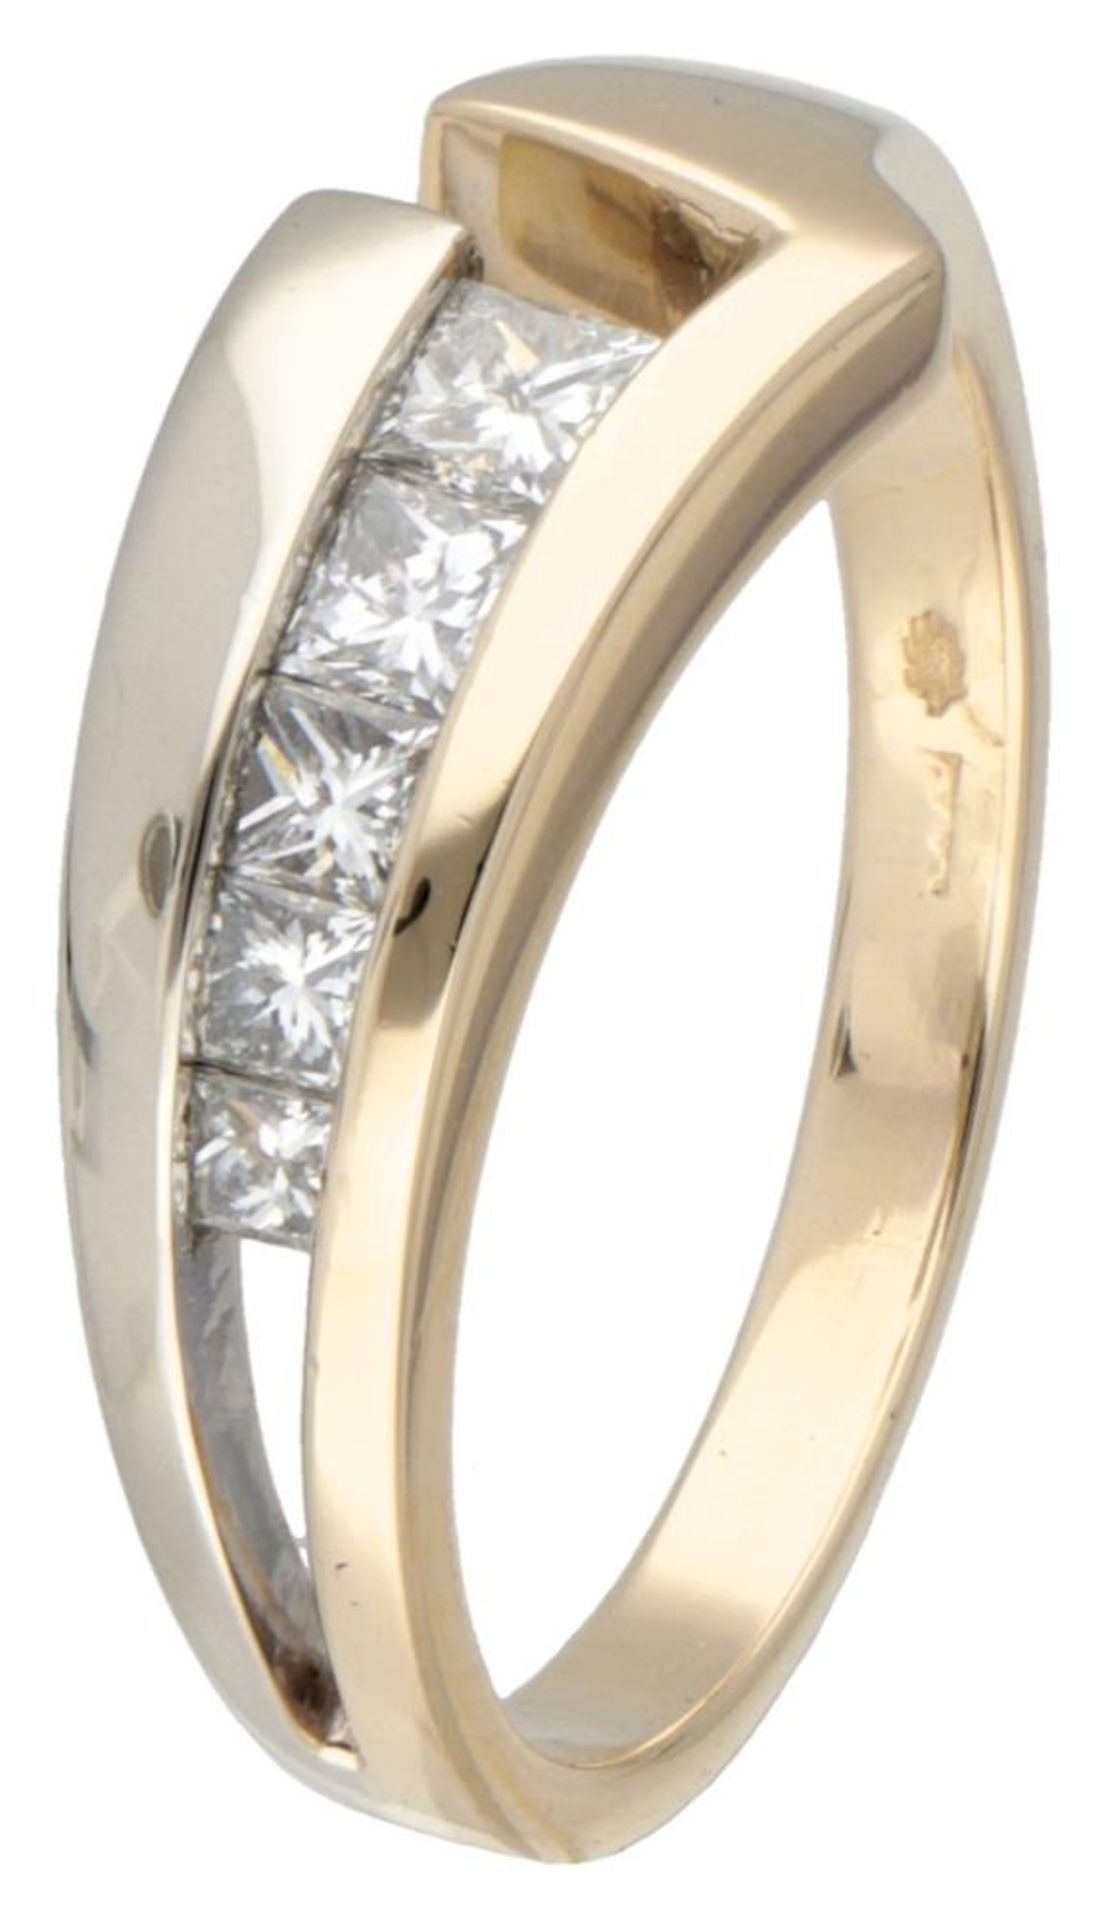 14K. Bicolor gold ring set with approx. 0.41 ct. diamond.